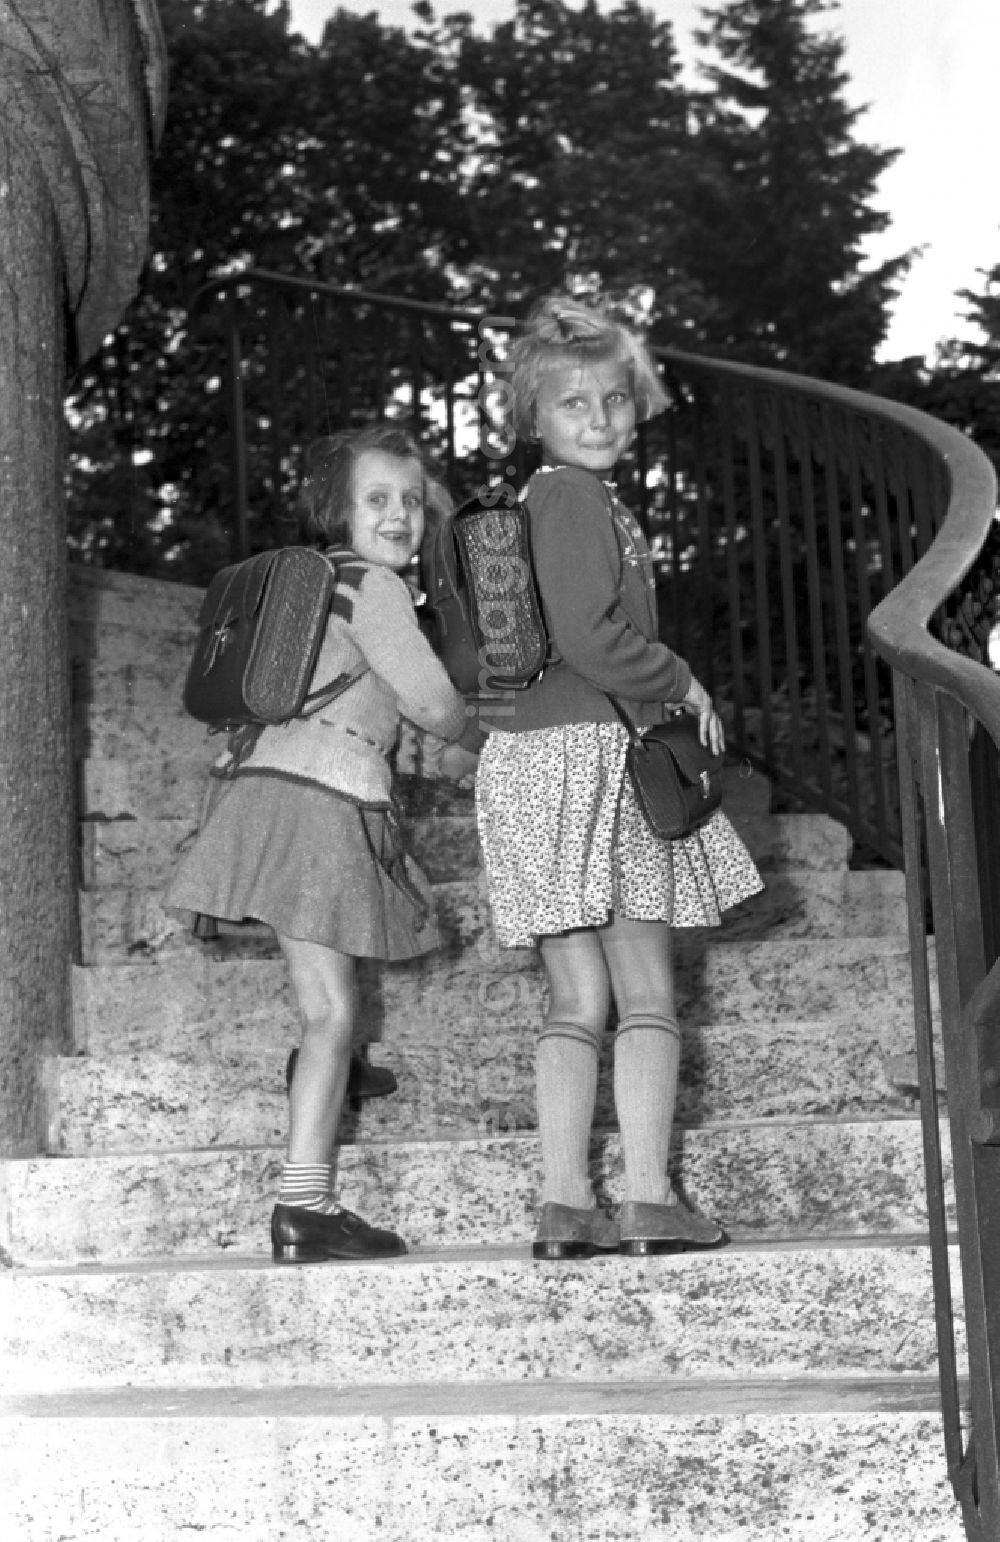 GDR image archive: Dresden - Children on the occasion of the start of school fuer zwei junge Maedchen mit Schulranzen in the district Altstadt in Dresden in the state Saxony on the territory of the former GDR, German Democratic Republic